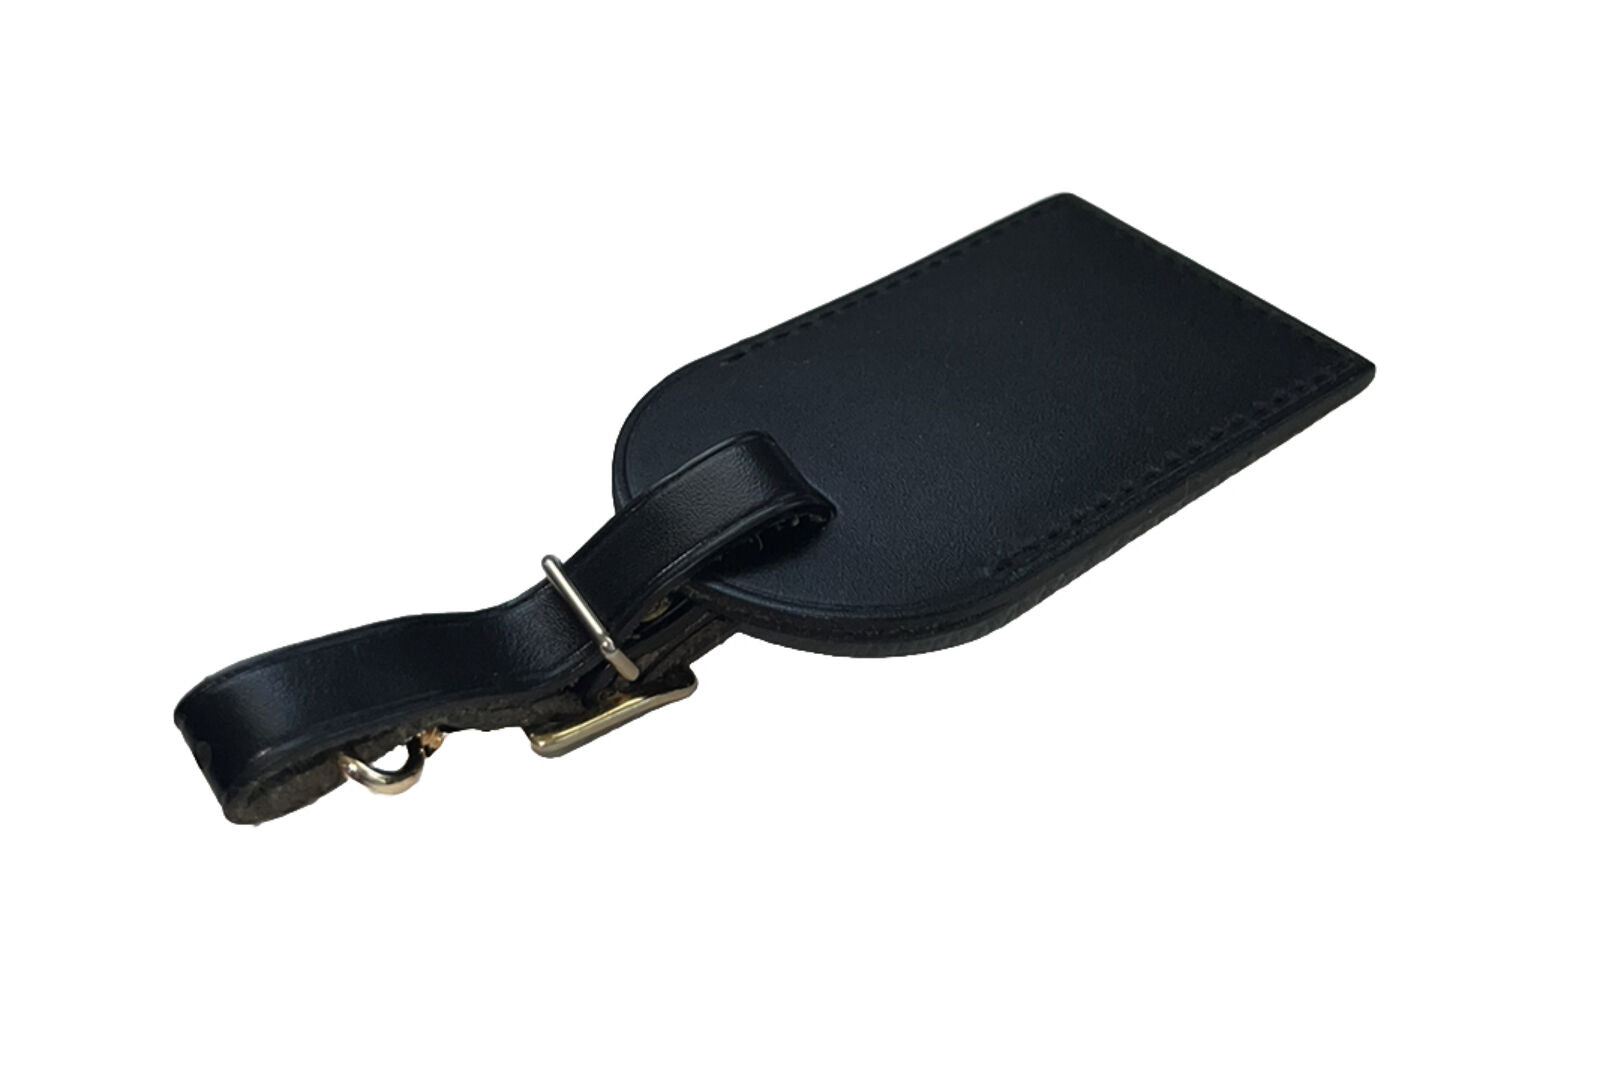 Louis Vuitton Luggage Tag w/ H & A Stamped Initials Goldtone Black Leather UEC